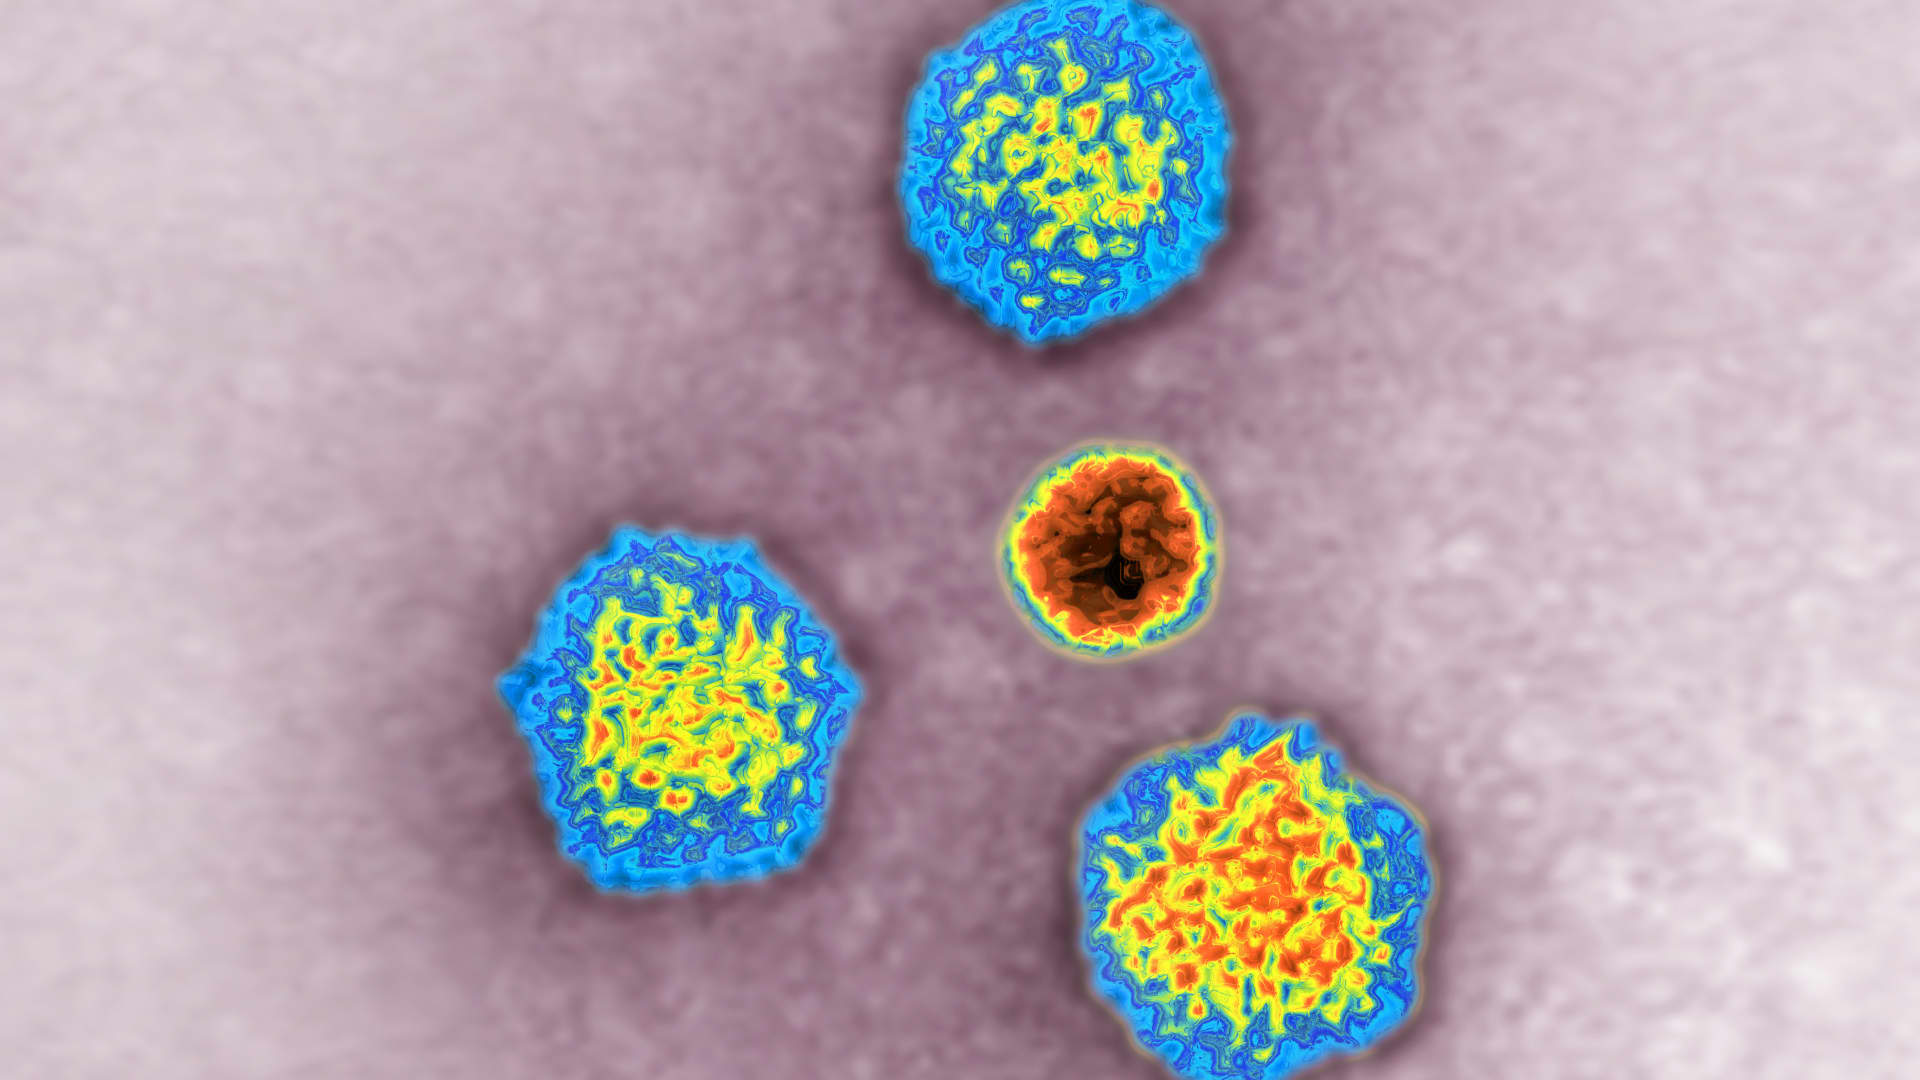 Hepatitis outbreak in kids may be linked to adenovirus, WHO says